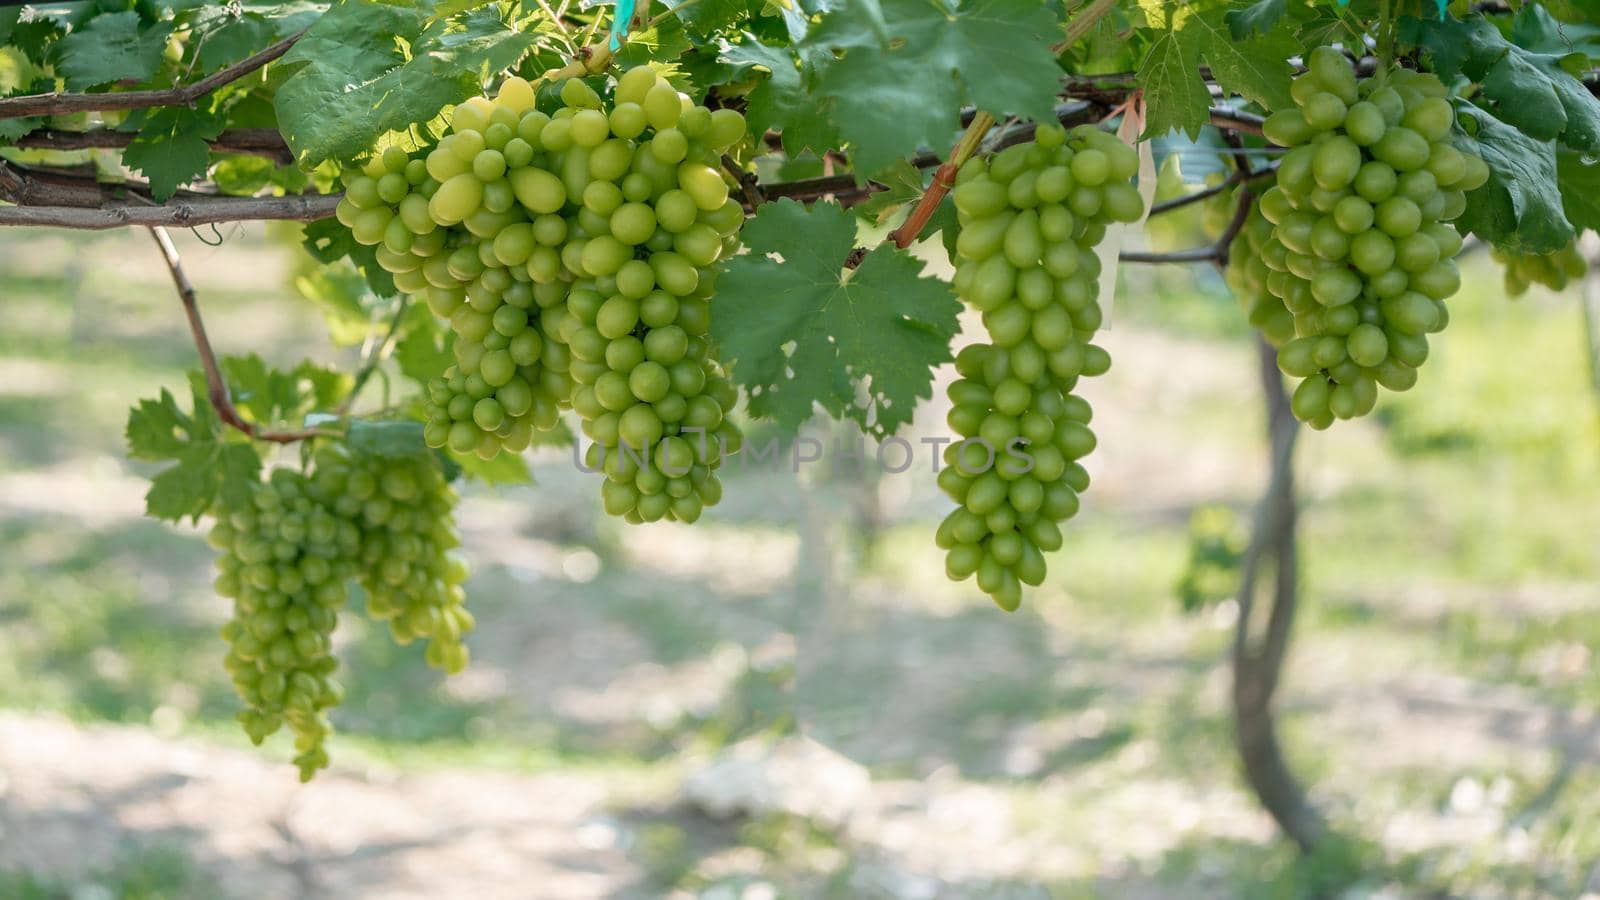 Green grapes in vineyard. by sirawit99